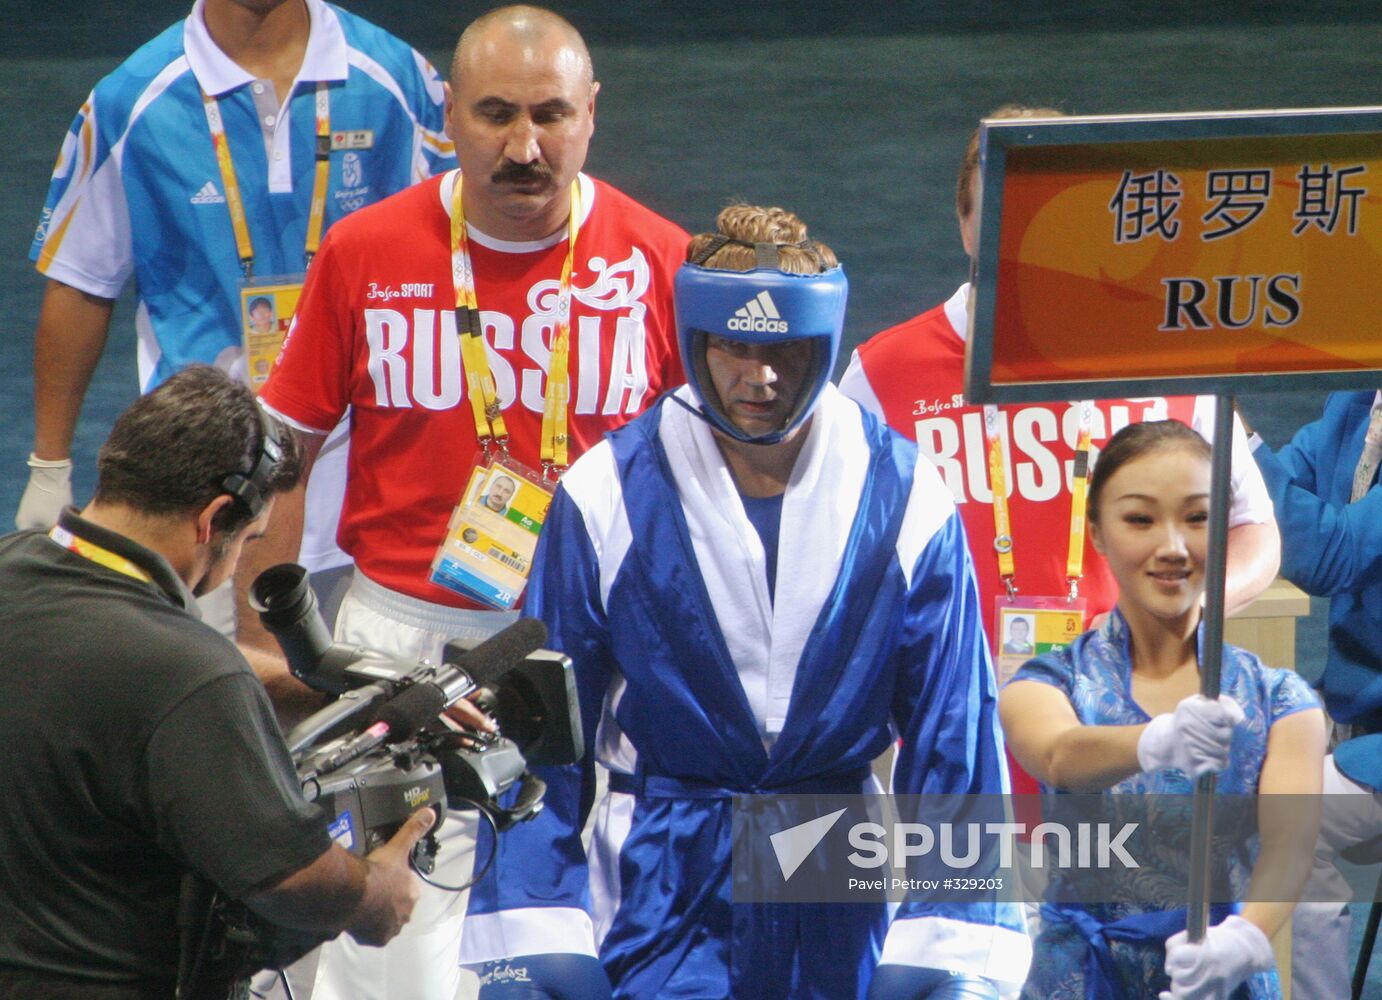 Boxing, the 29th Olympic Games